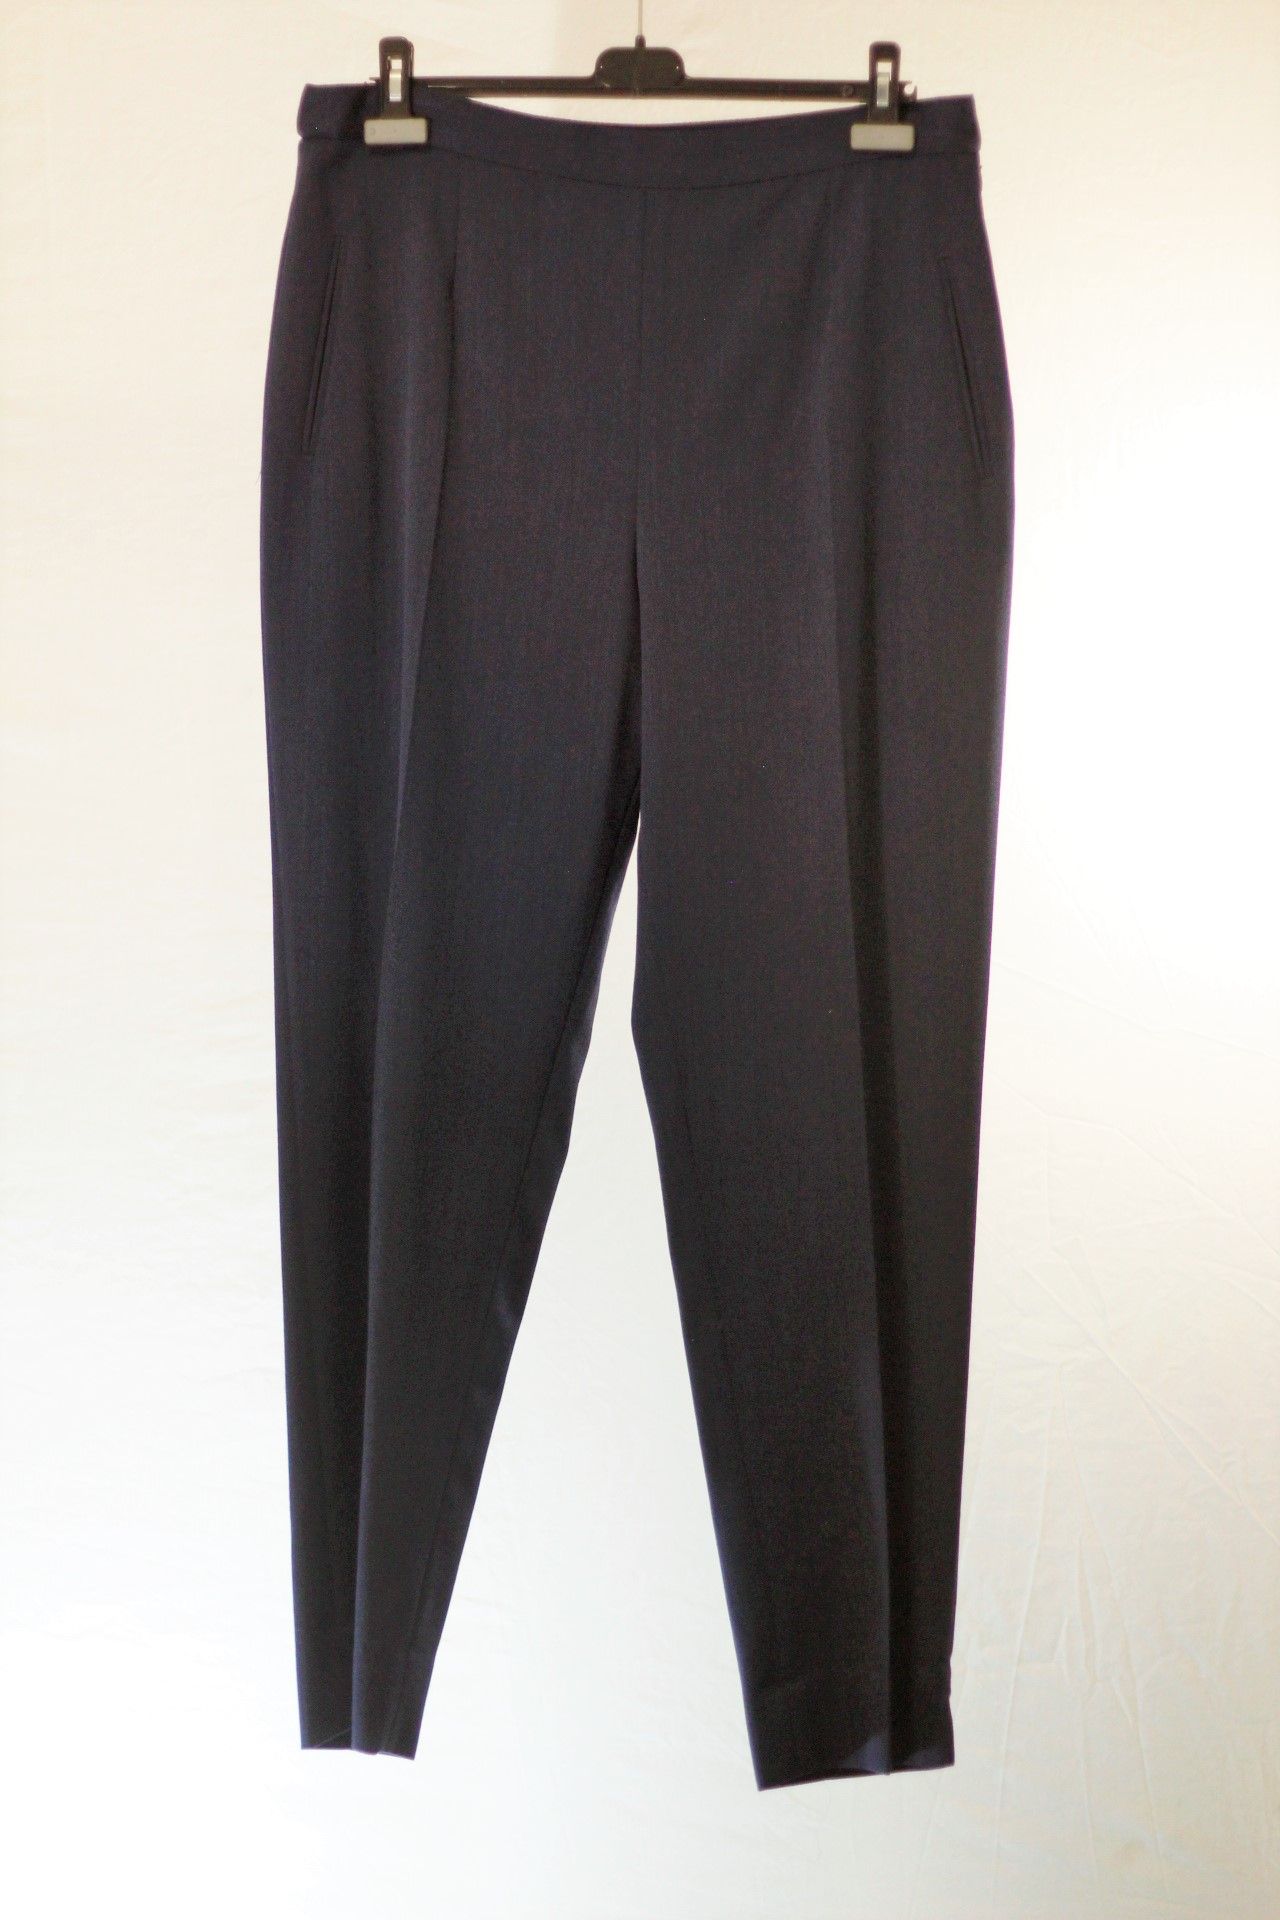 1 x Belvest Navy Trousers - Size: 26 - Material: Wool/ Cotton - From a High End Clothing Boutique In - Image 8 of 9